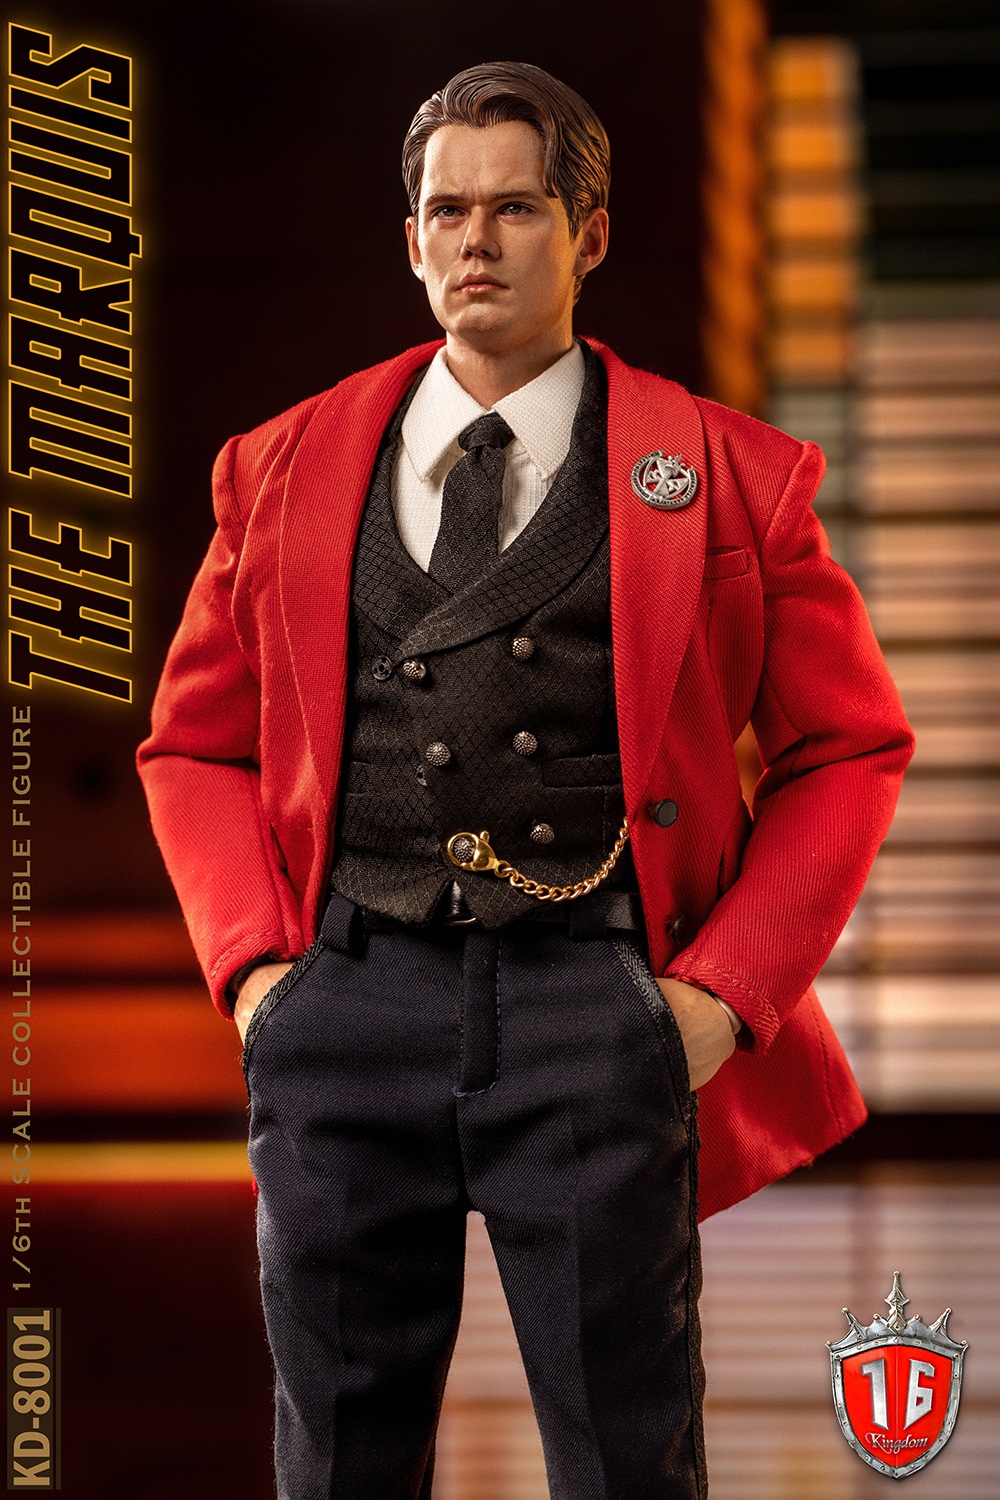 TheMarquis - NEW PRODUCT: Kingdom: 1/6 The Marquis Action Figure KD-8001 11390912